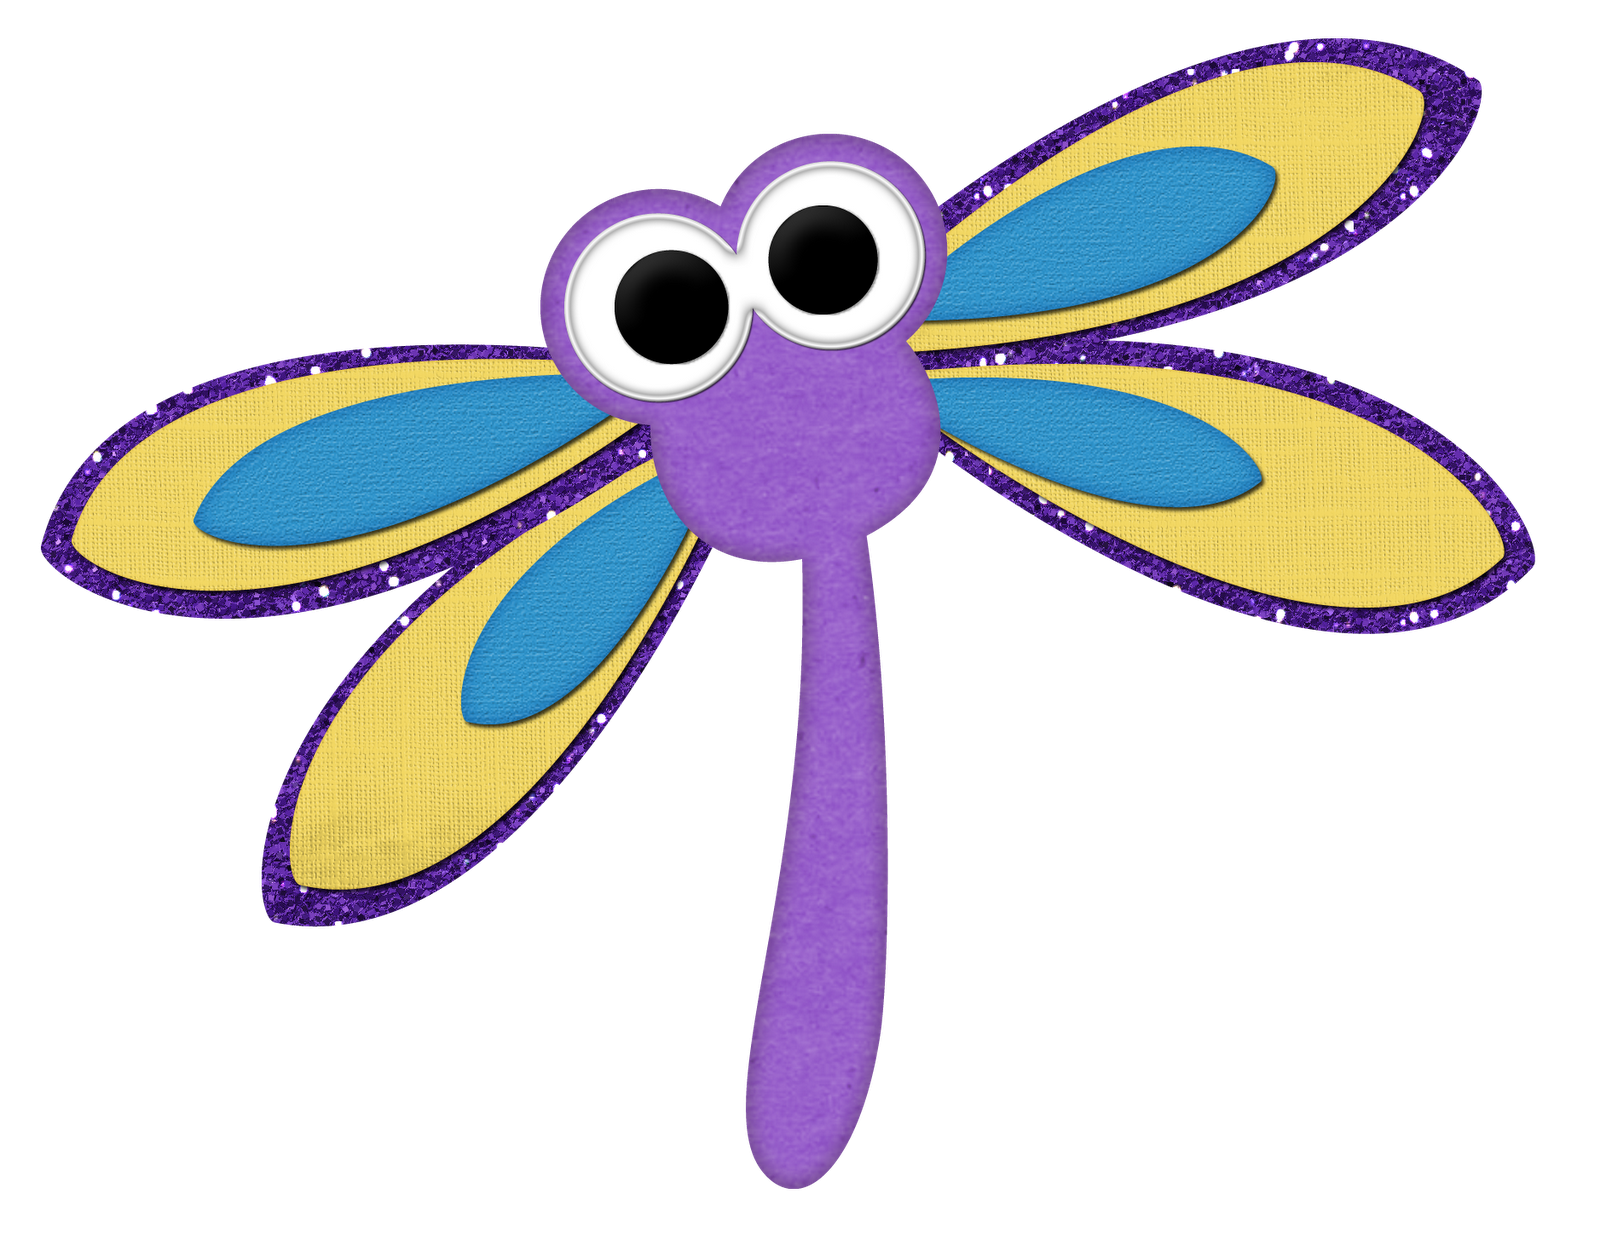 Unique of purple letters. Dragonfly clipart copyright free